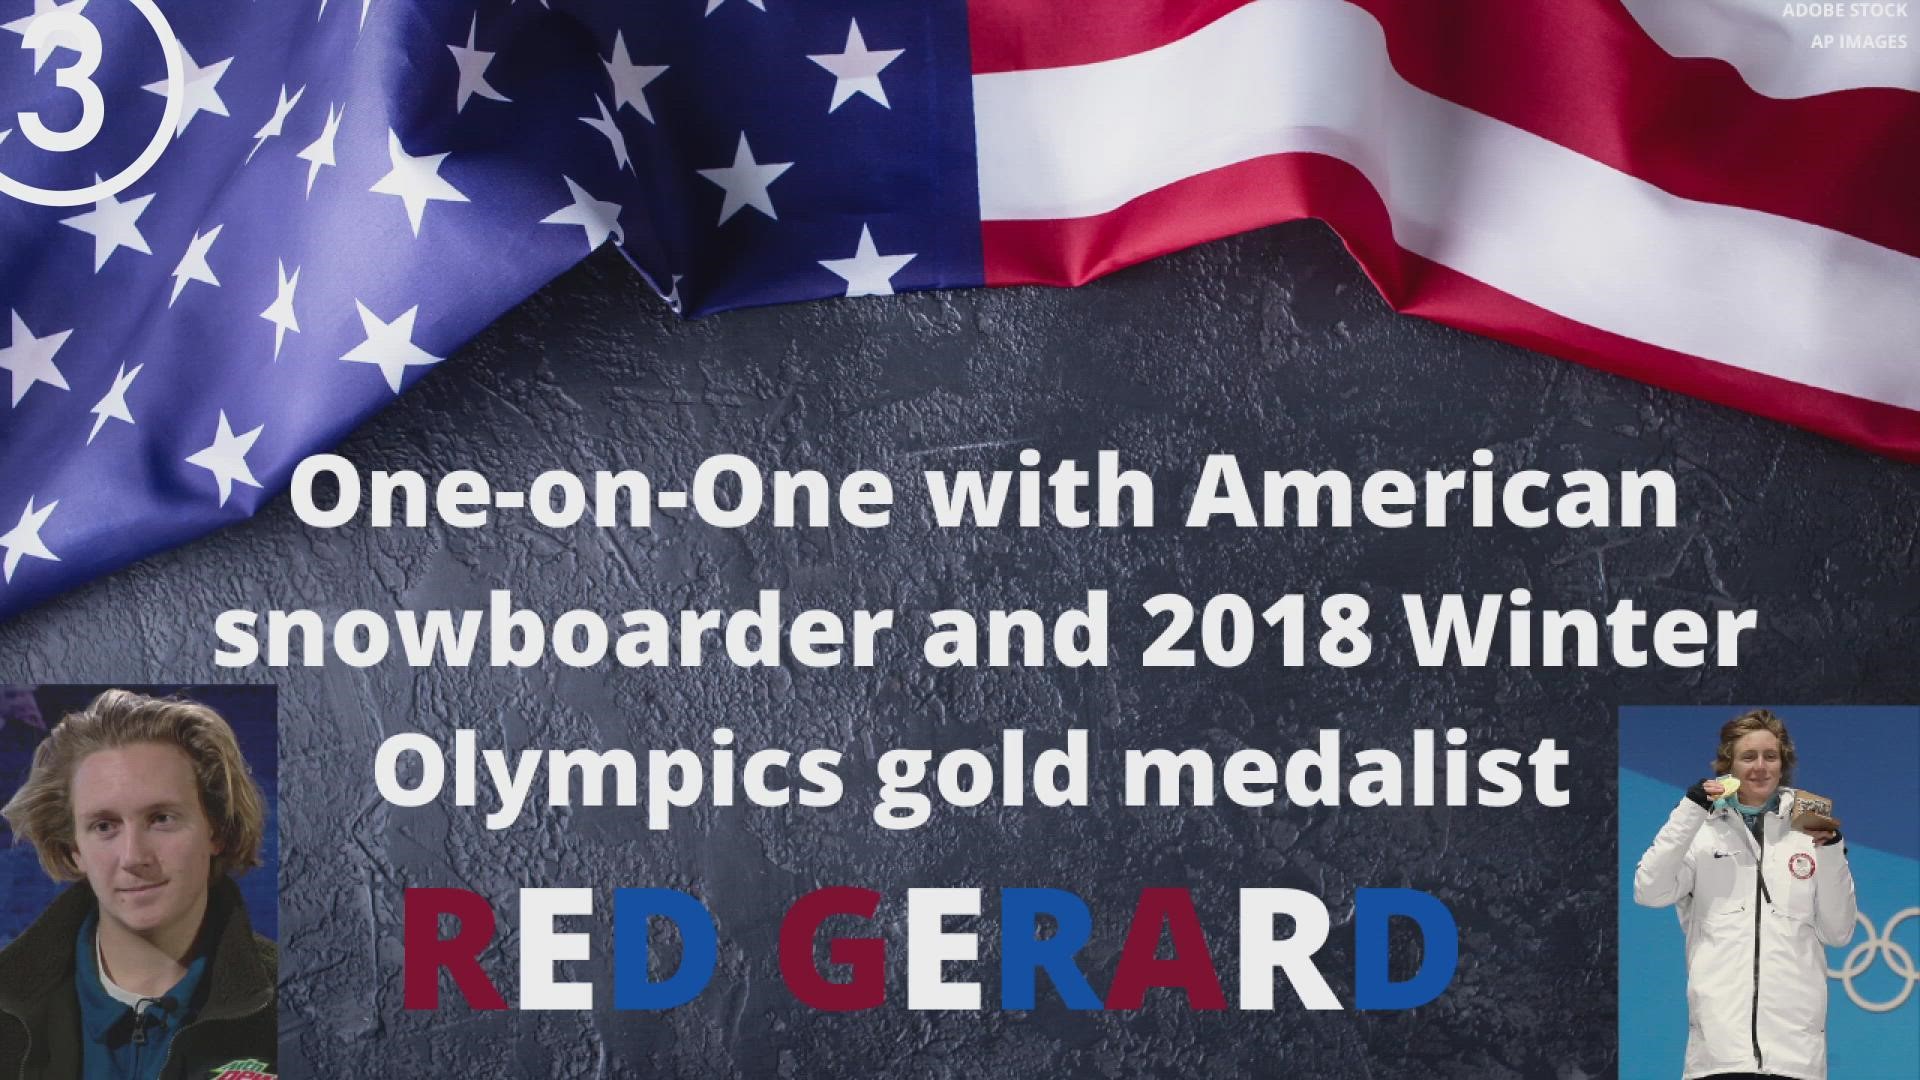 Red Gerard is an American snowboarder and a 2018 Winter Olympics gold medalist of the 2018 United States Olympic team.